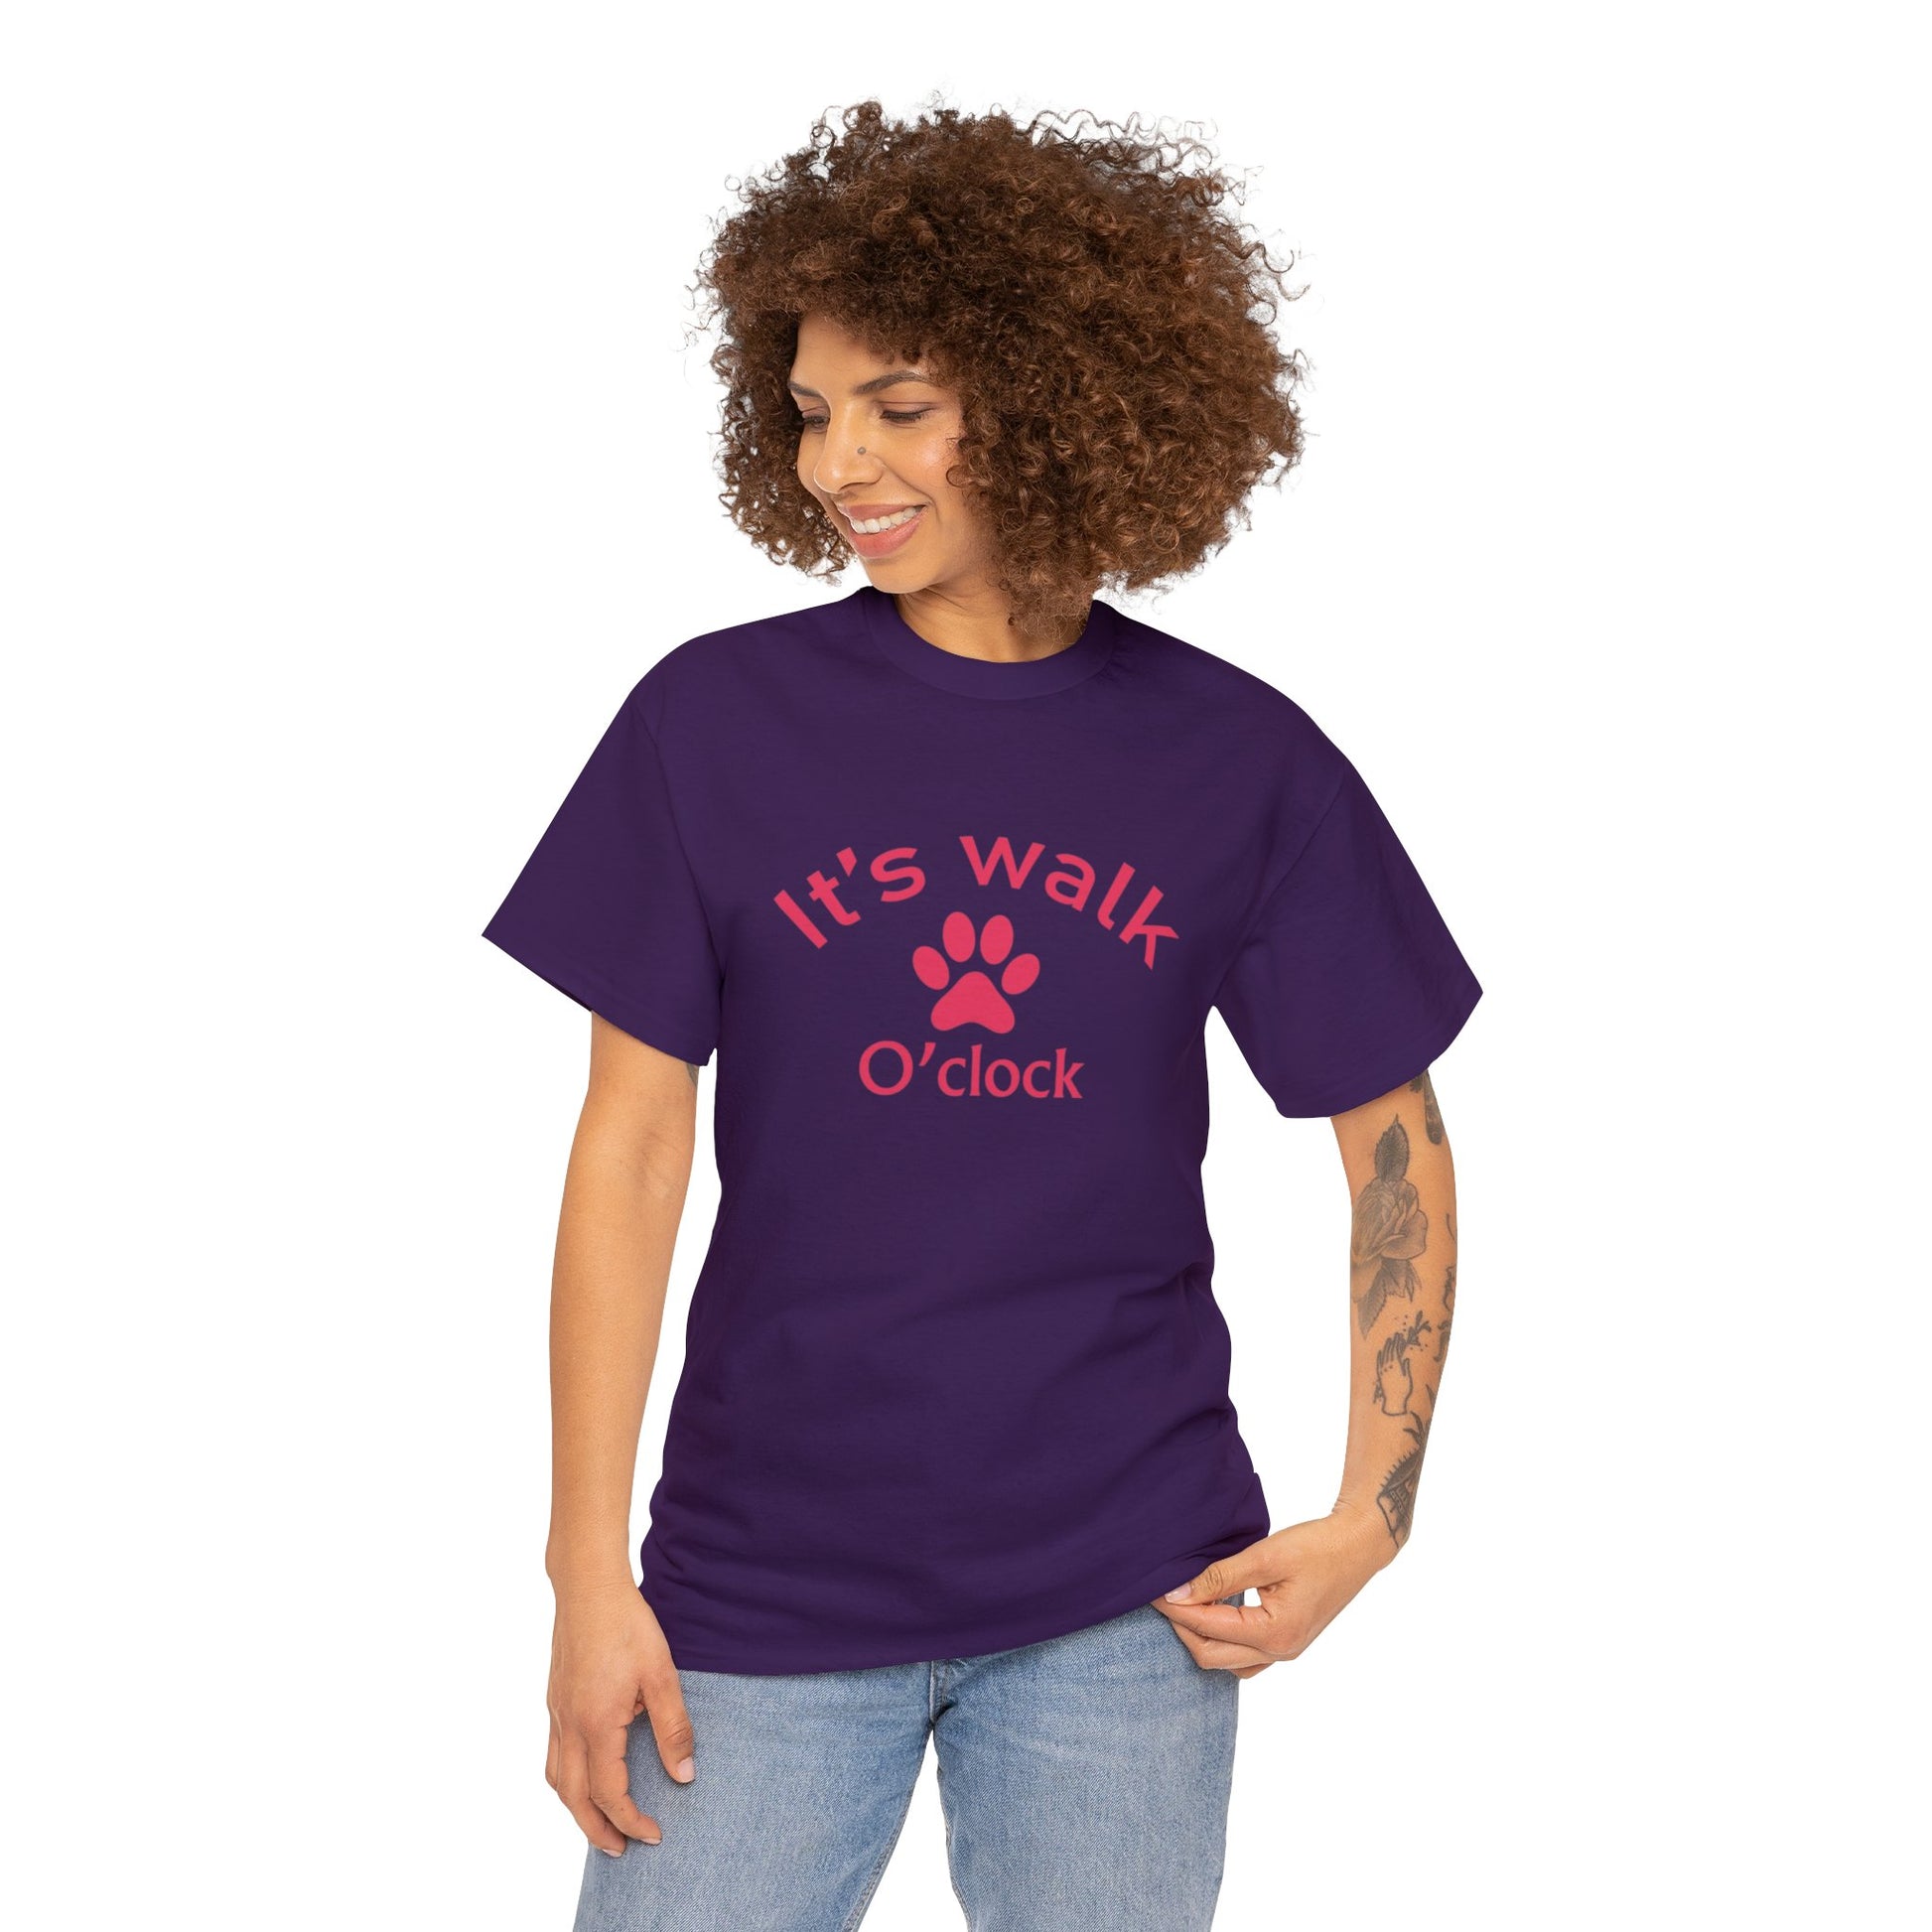 "It's Walk O'clock" Women's T-Shirt - Weave Got Gifts - Unique Gifts You Won’t Find Anywhere Else!